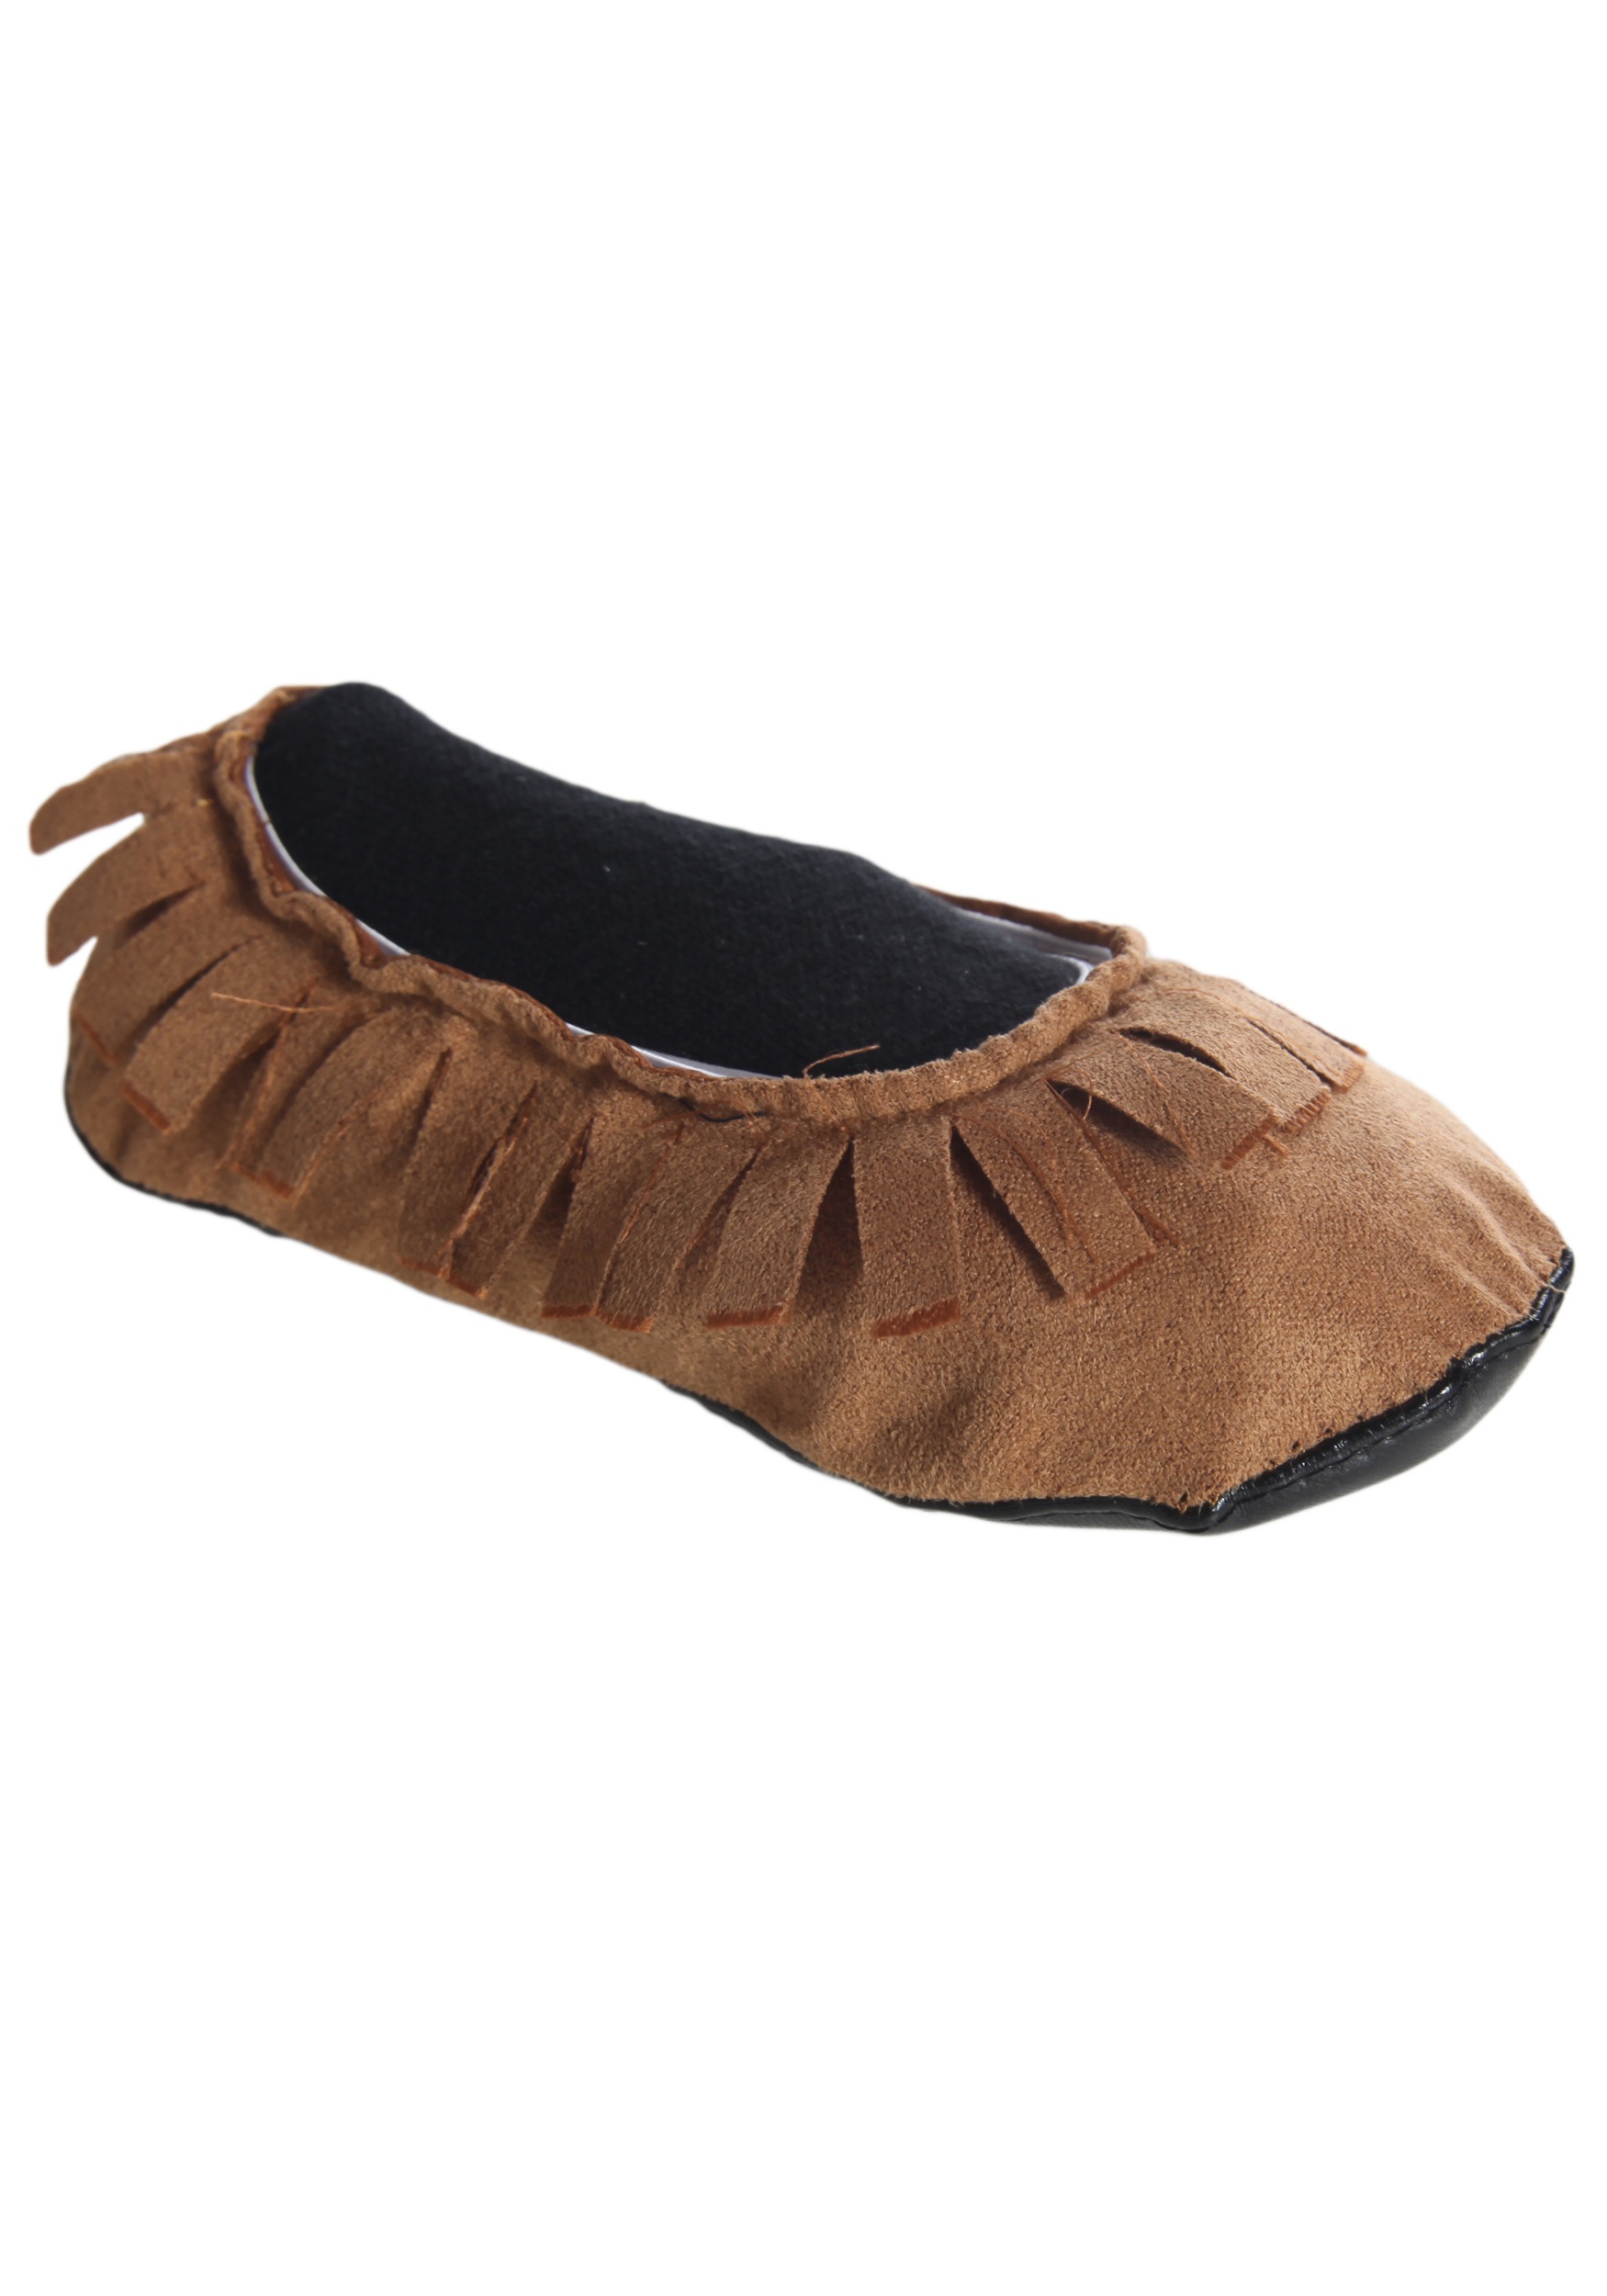 moccasins for toddlers